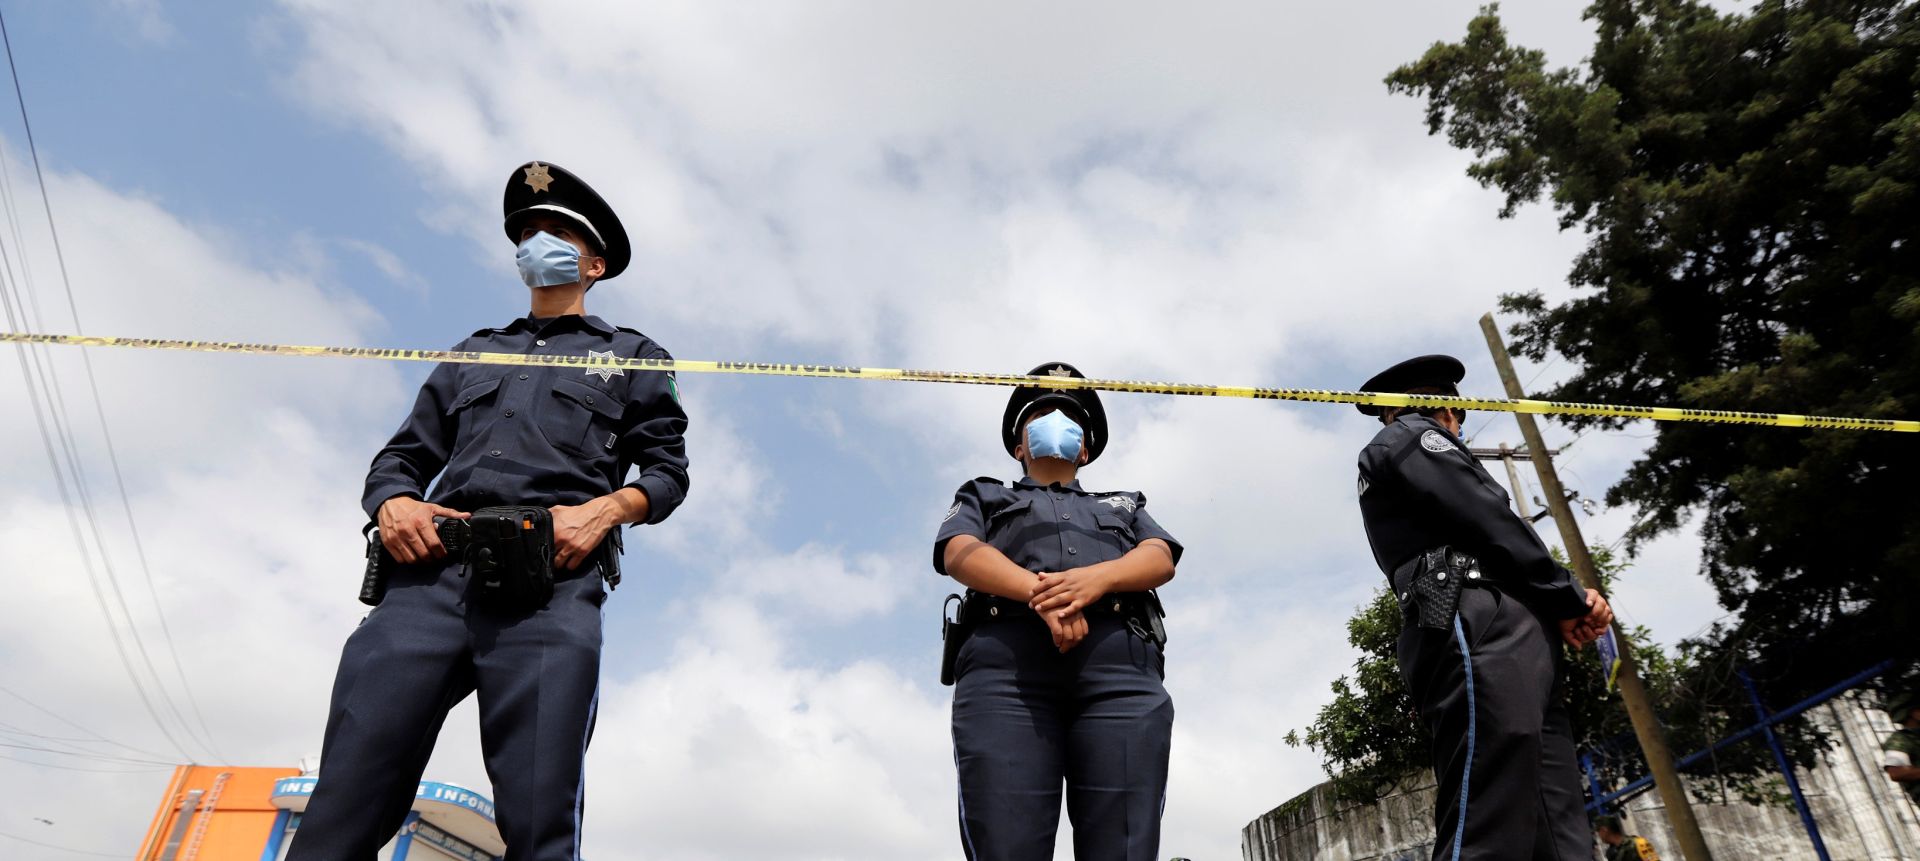 Police officers keep watch at the perimeter of an area evacuated due a gas leak caused by a pipeline theft in Puebla Police officers keep watch at the perimeter of an area evacuated due a gas leak caused by a pipeline theft in Puebla, Mexico September 12, 2018. REUTERS/Imelda Medina IMELDA MEDINA